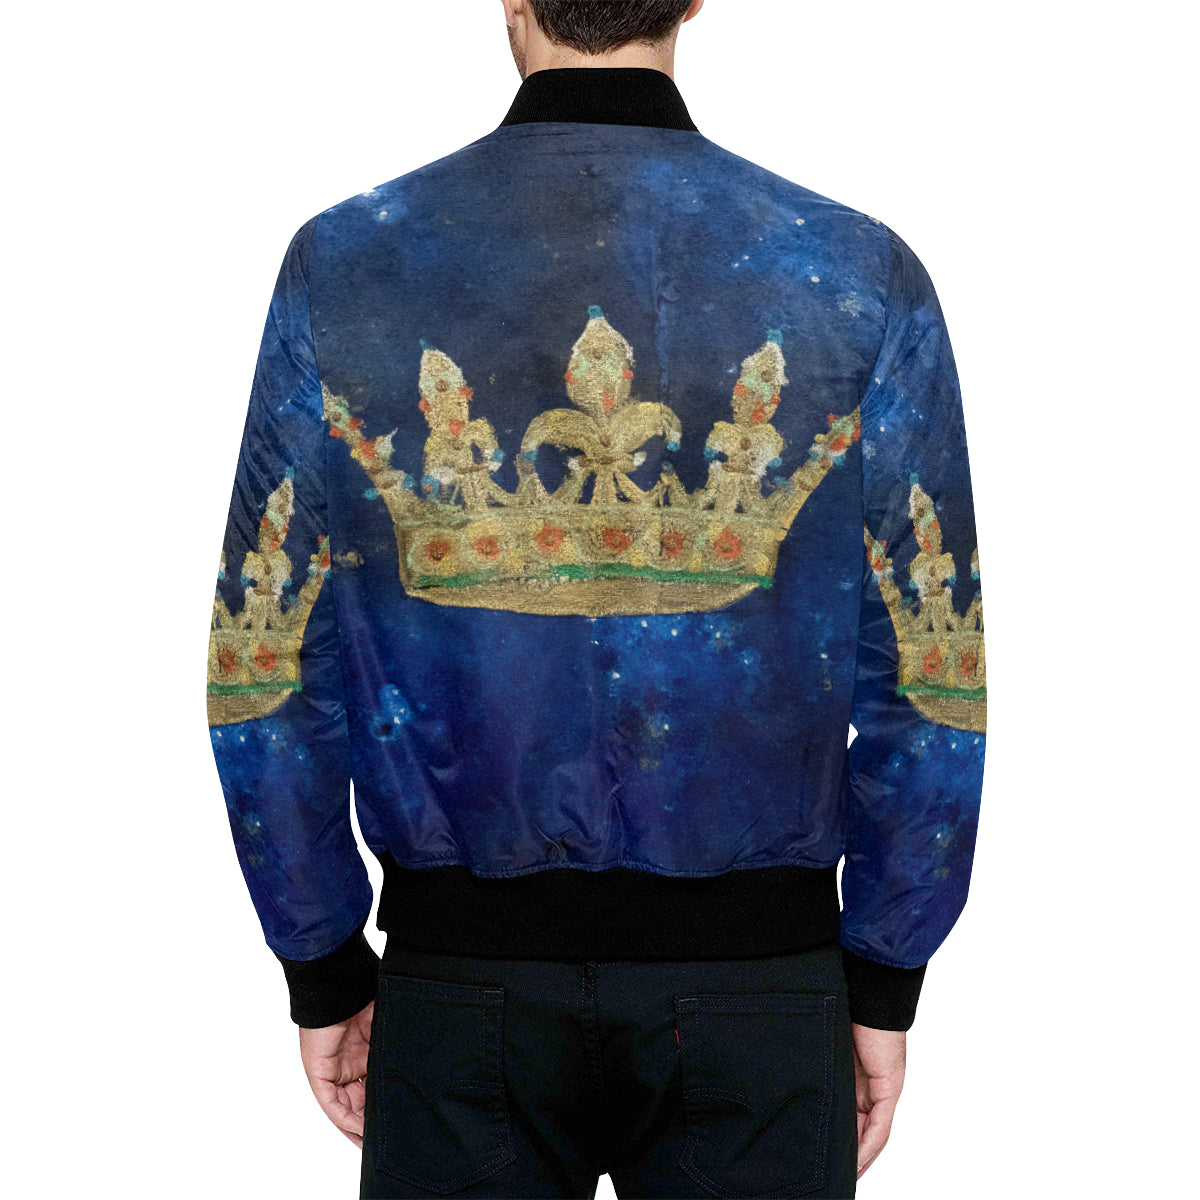 Bomber Jacket The crown